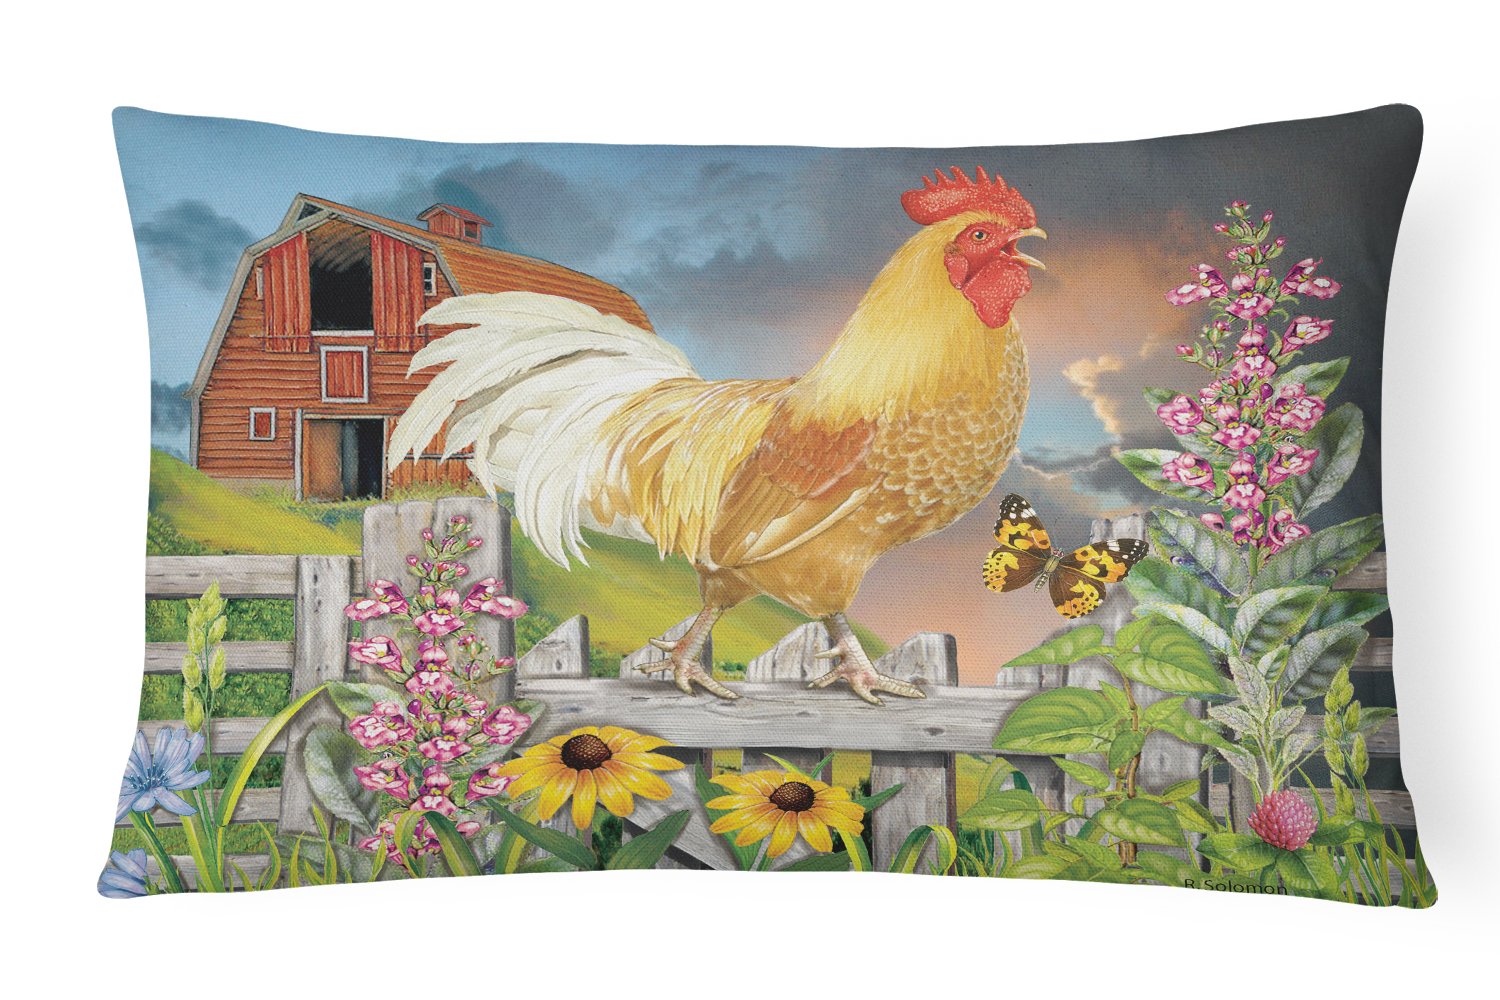 Yellow Rooster Greeting the Day Canvas Fabric Decorative Pillow PRS4024PW1216 by Caroline's Treasures